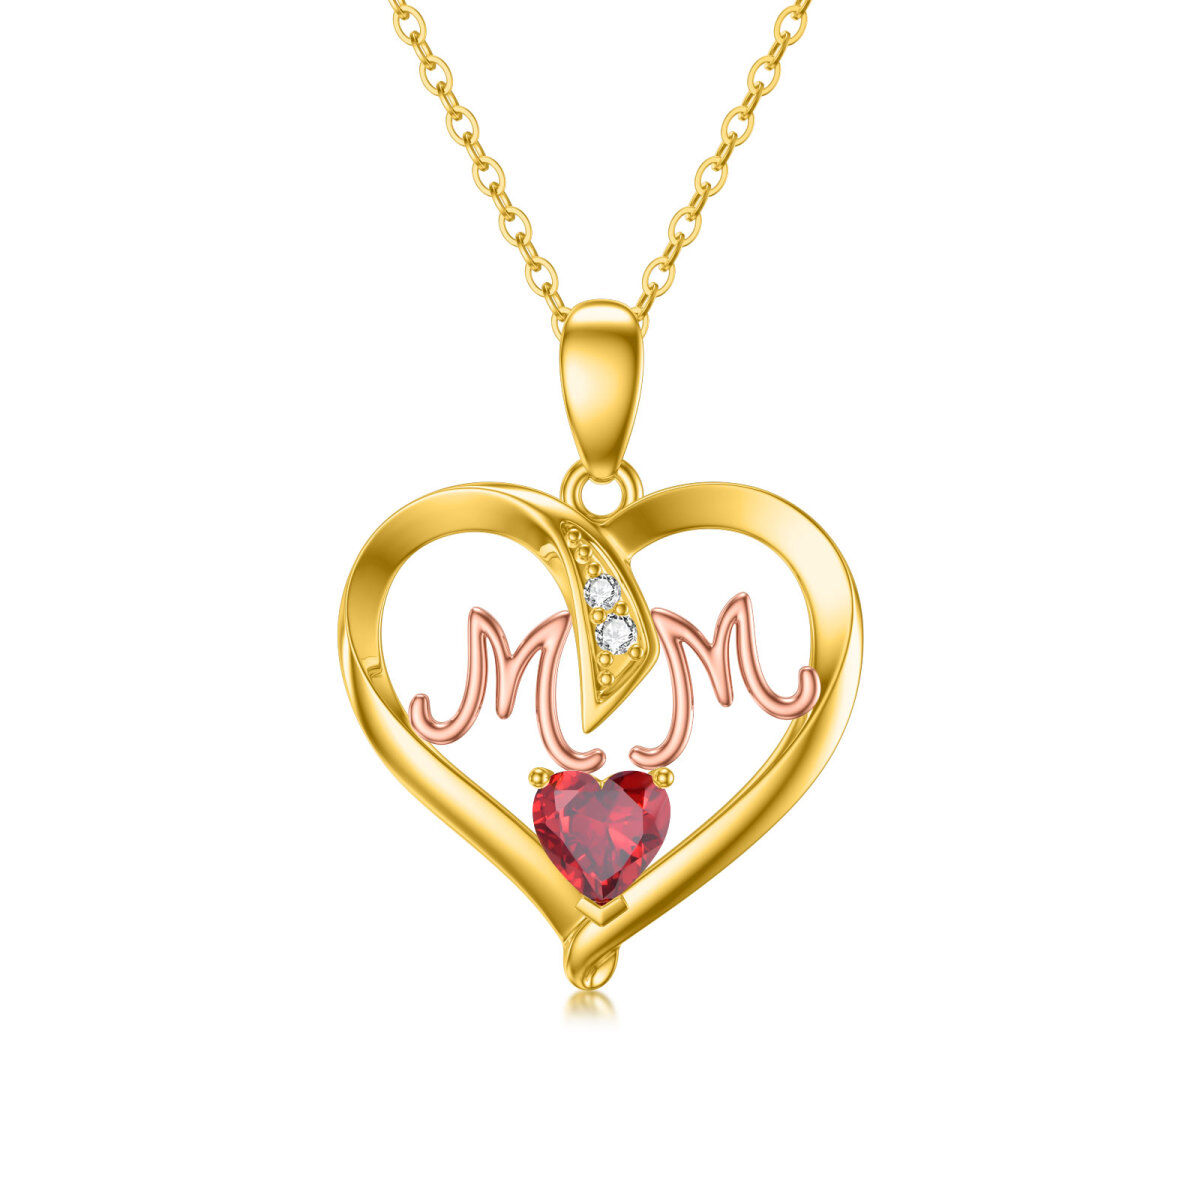 14K Gold & Rose Gold Heart Shaped Cubic Zirconia Heart Pendant Necklace with Engraved Word-1